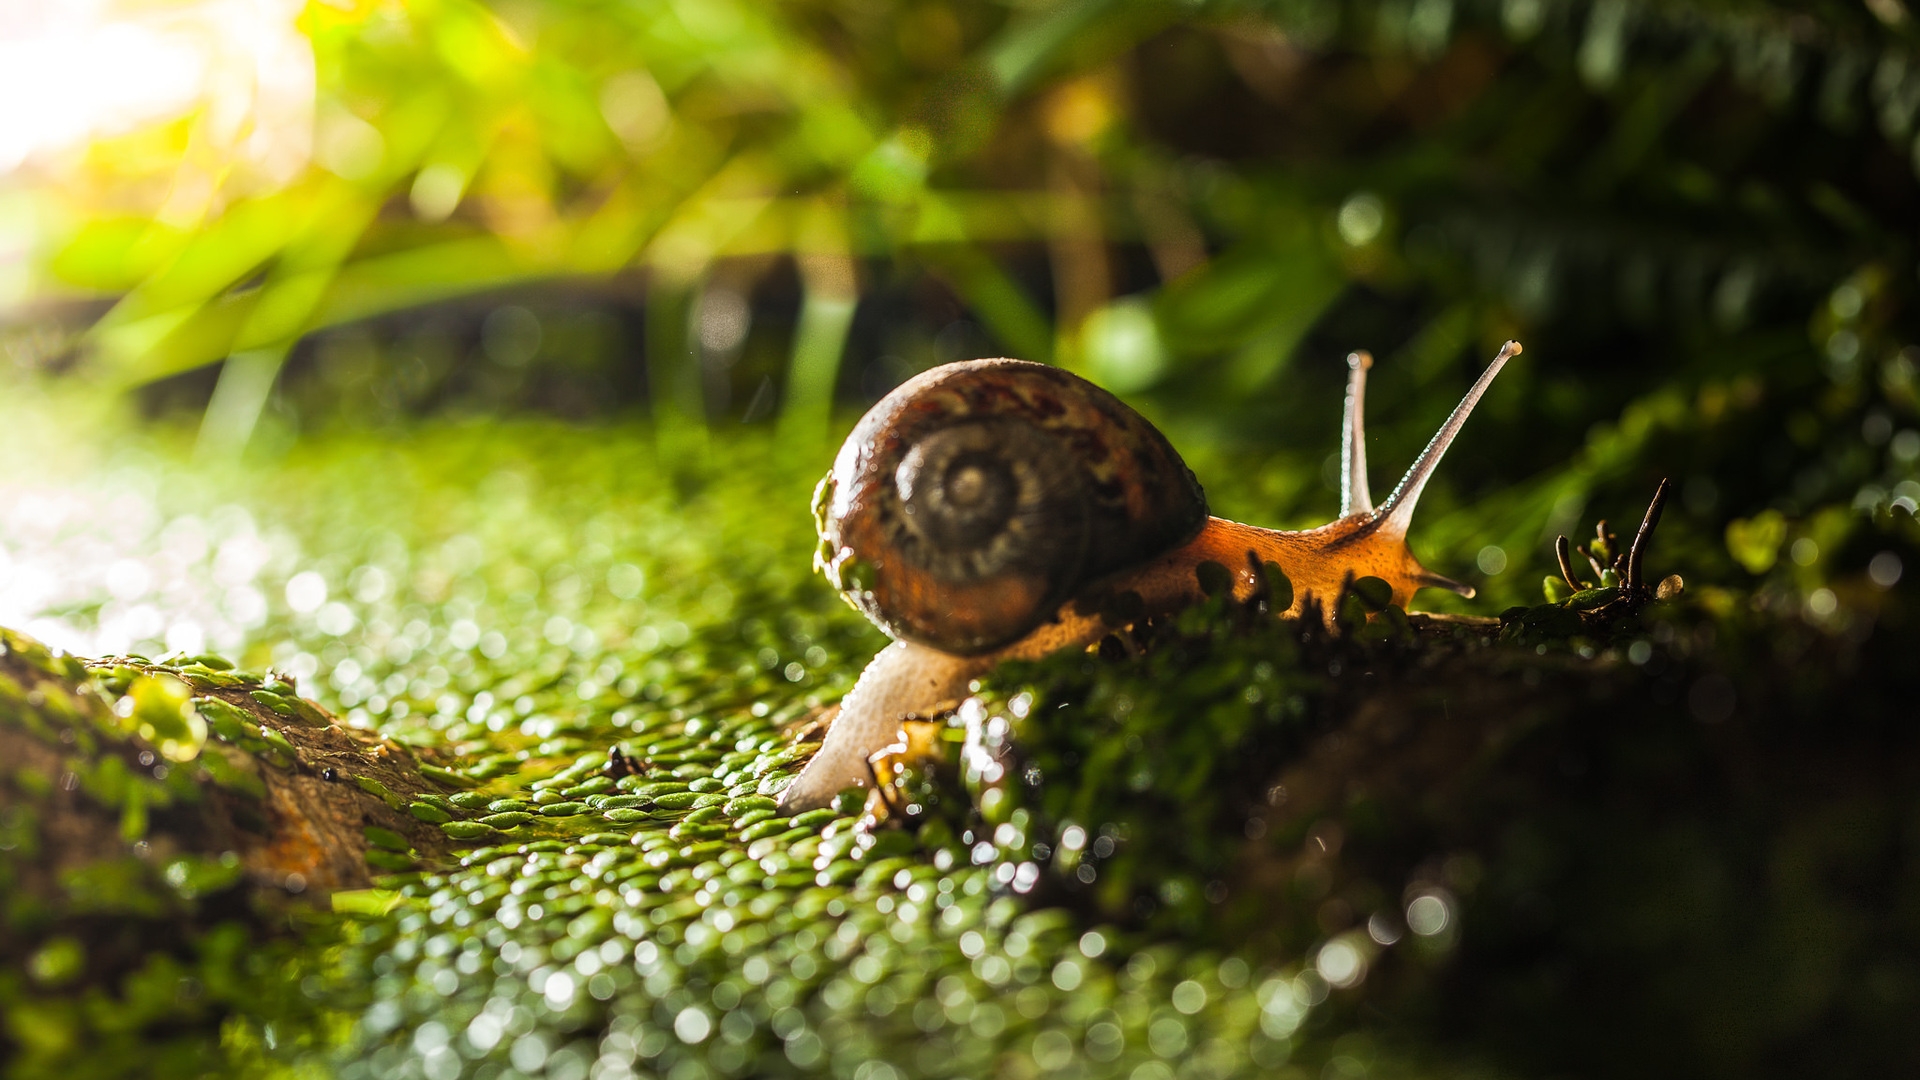 Tiny Snail on Green Grass  for 1920 x 1080 HDTV 1080p resolution